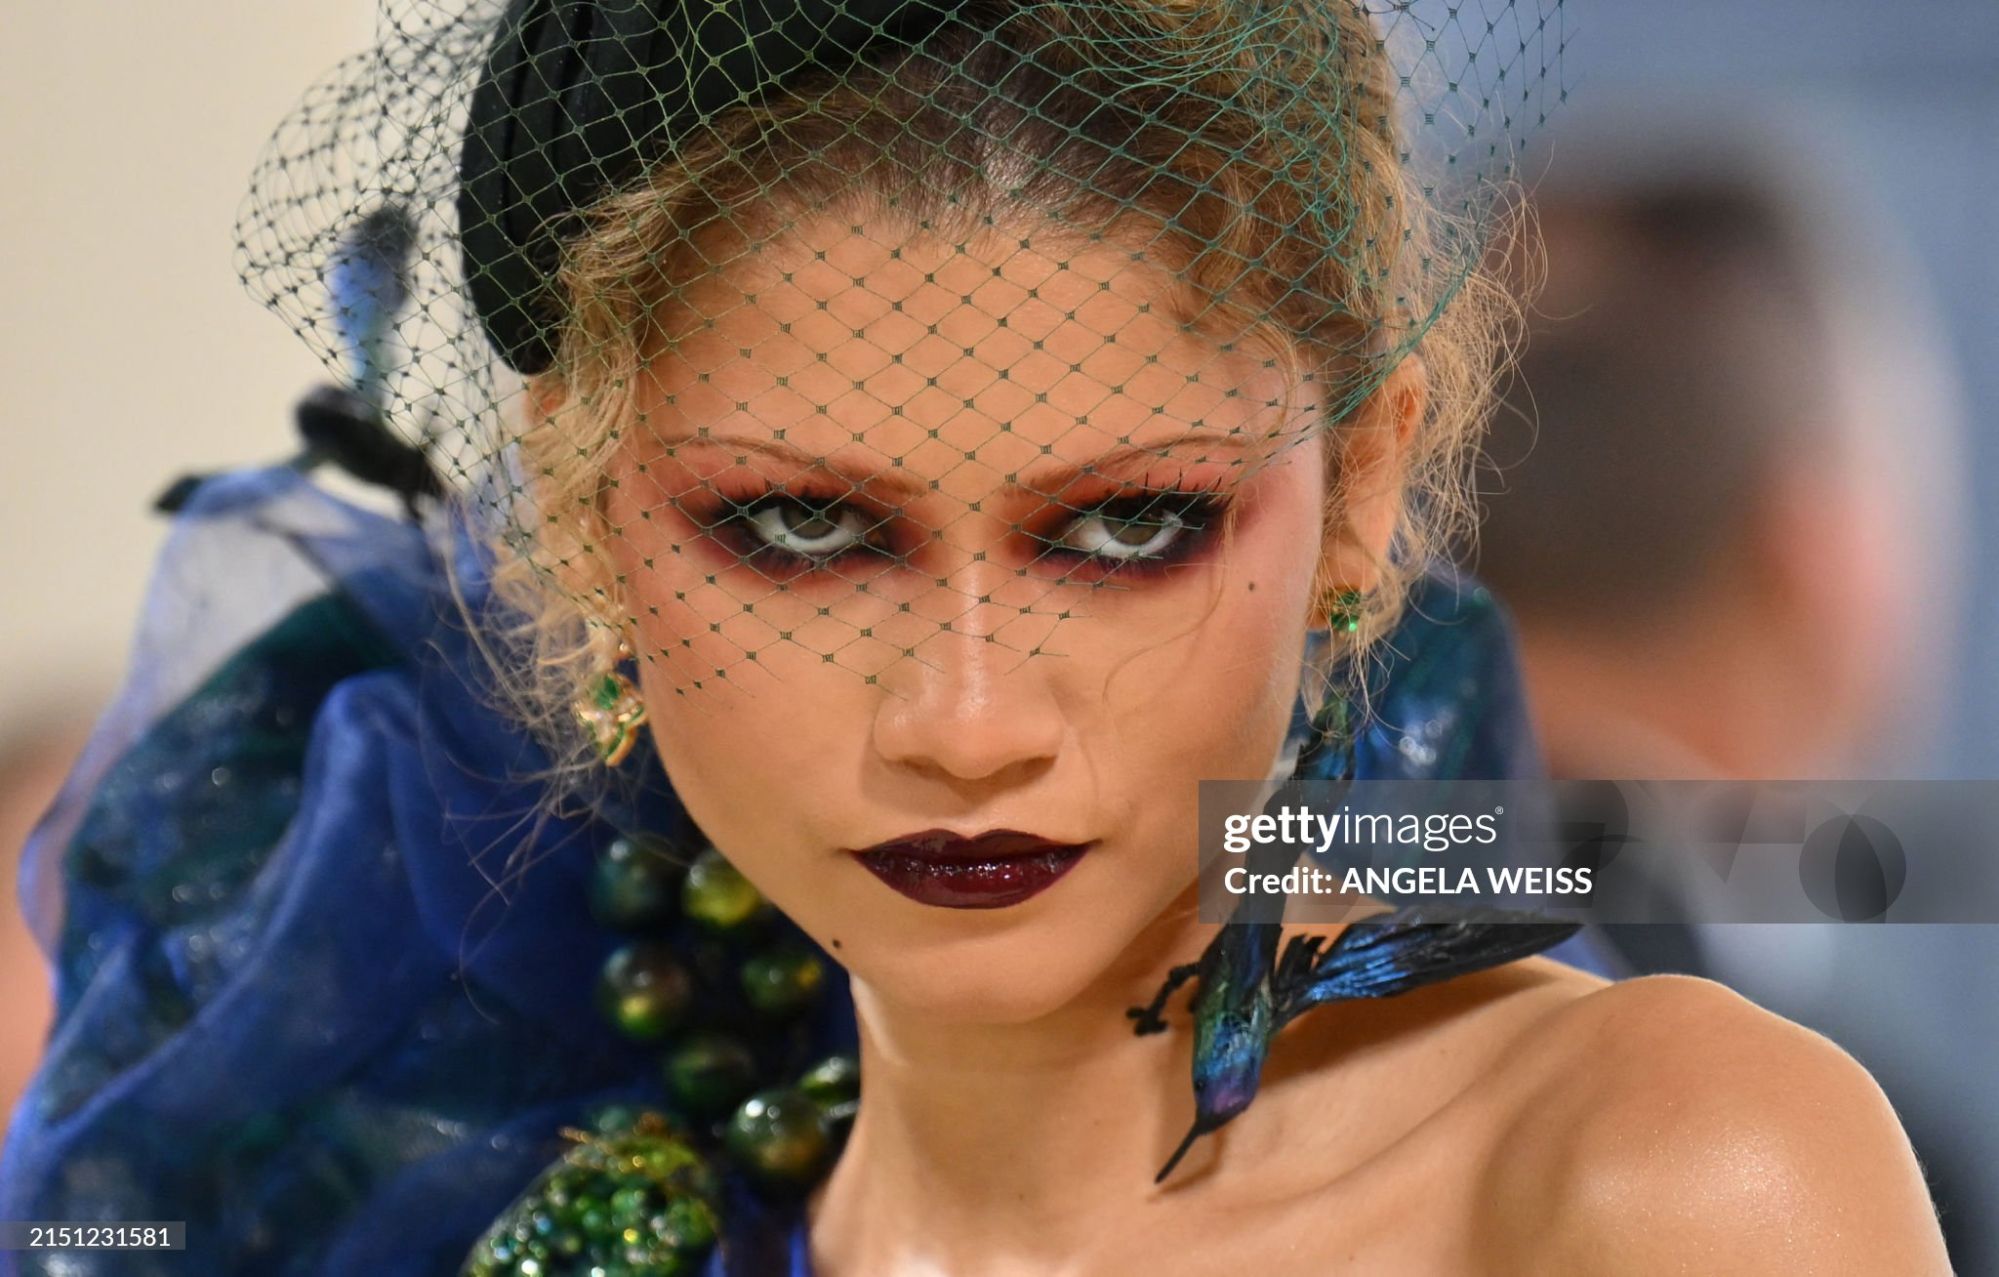 gettyimages-2151231581-2048x2048.jpg